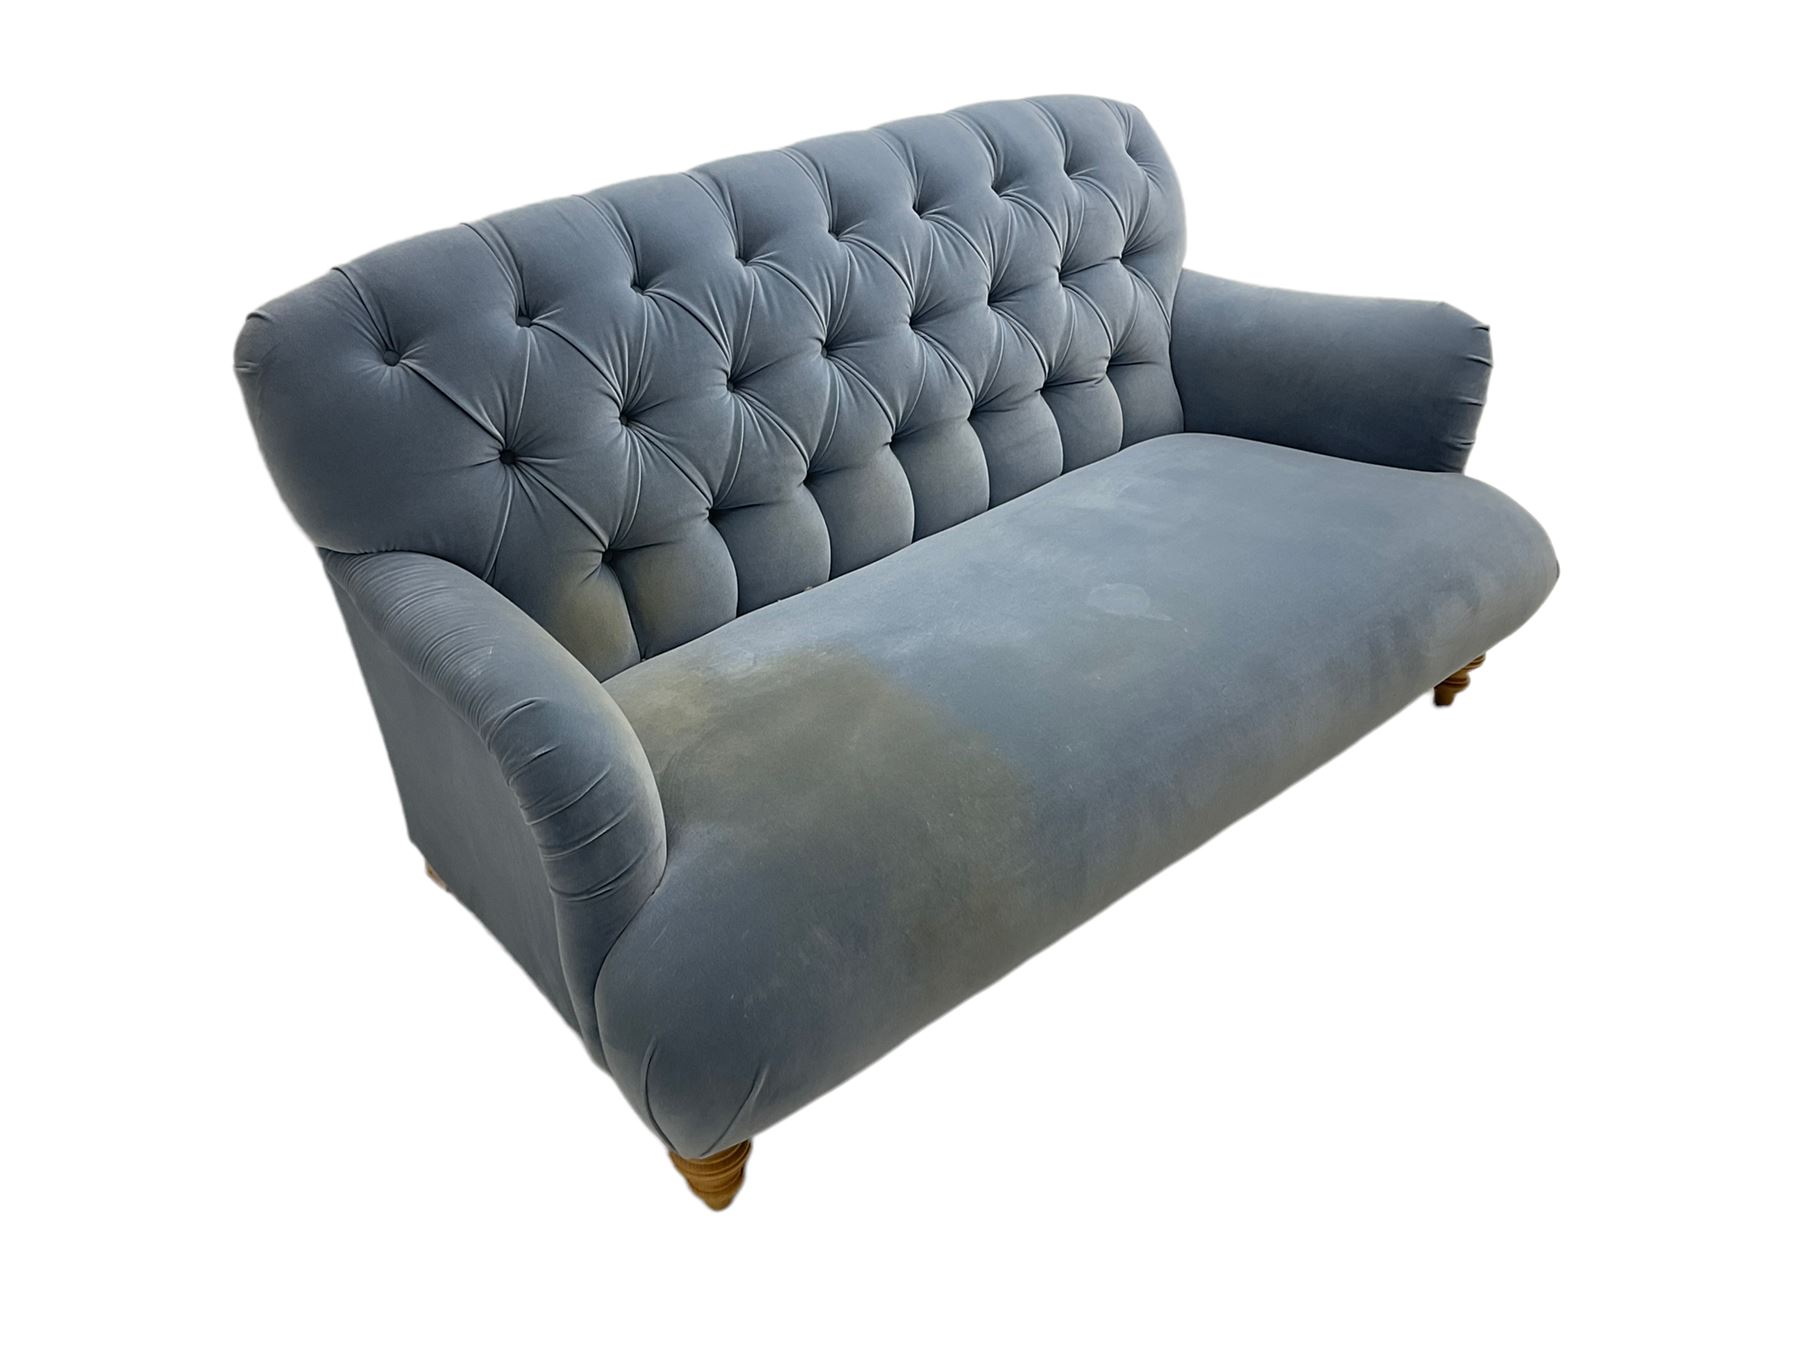 Tetrad - two seat sofa upholstered in baby blue buttoned fabric - Image 3 of 6